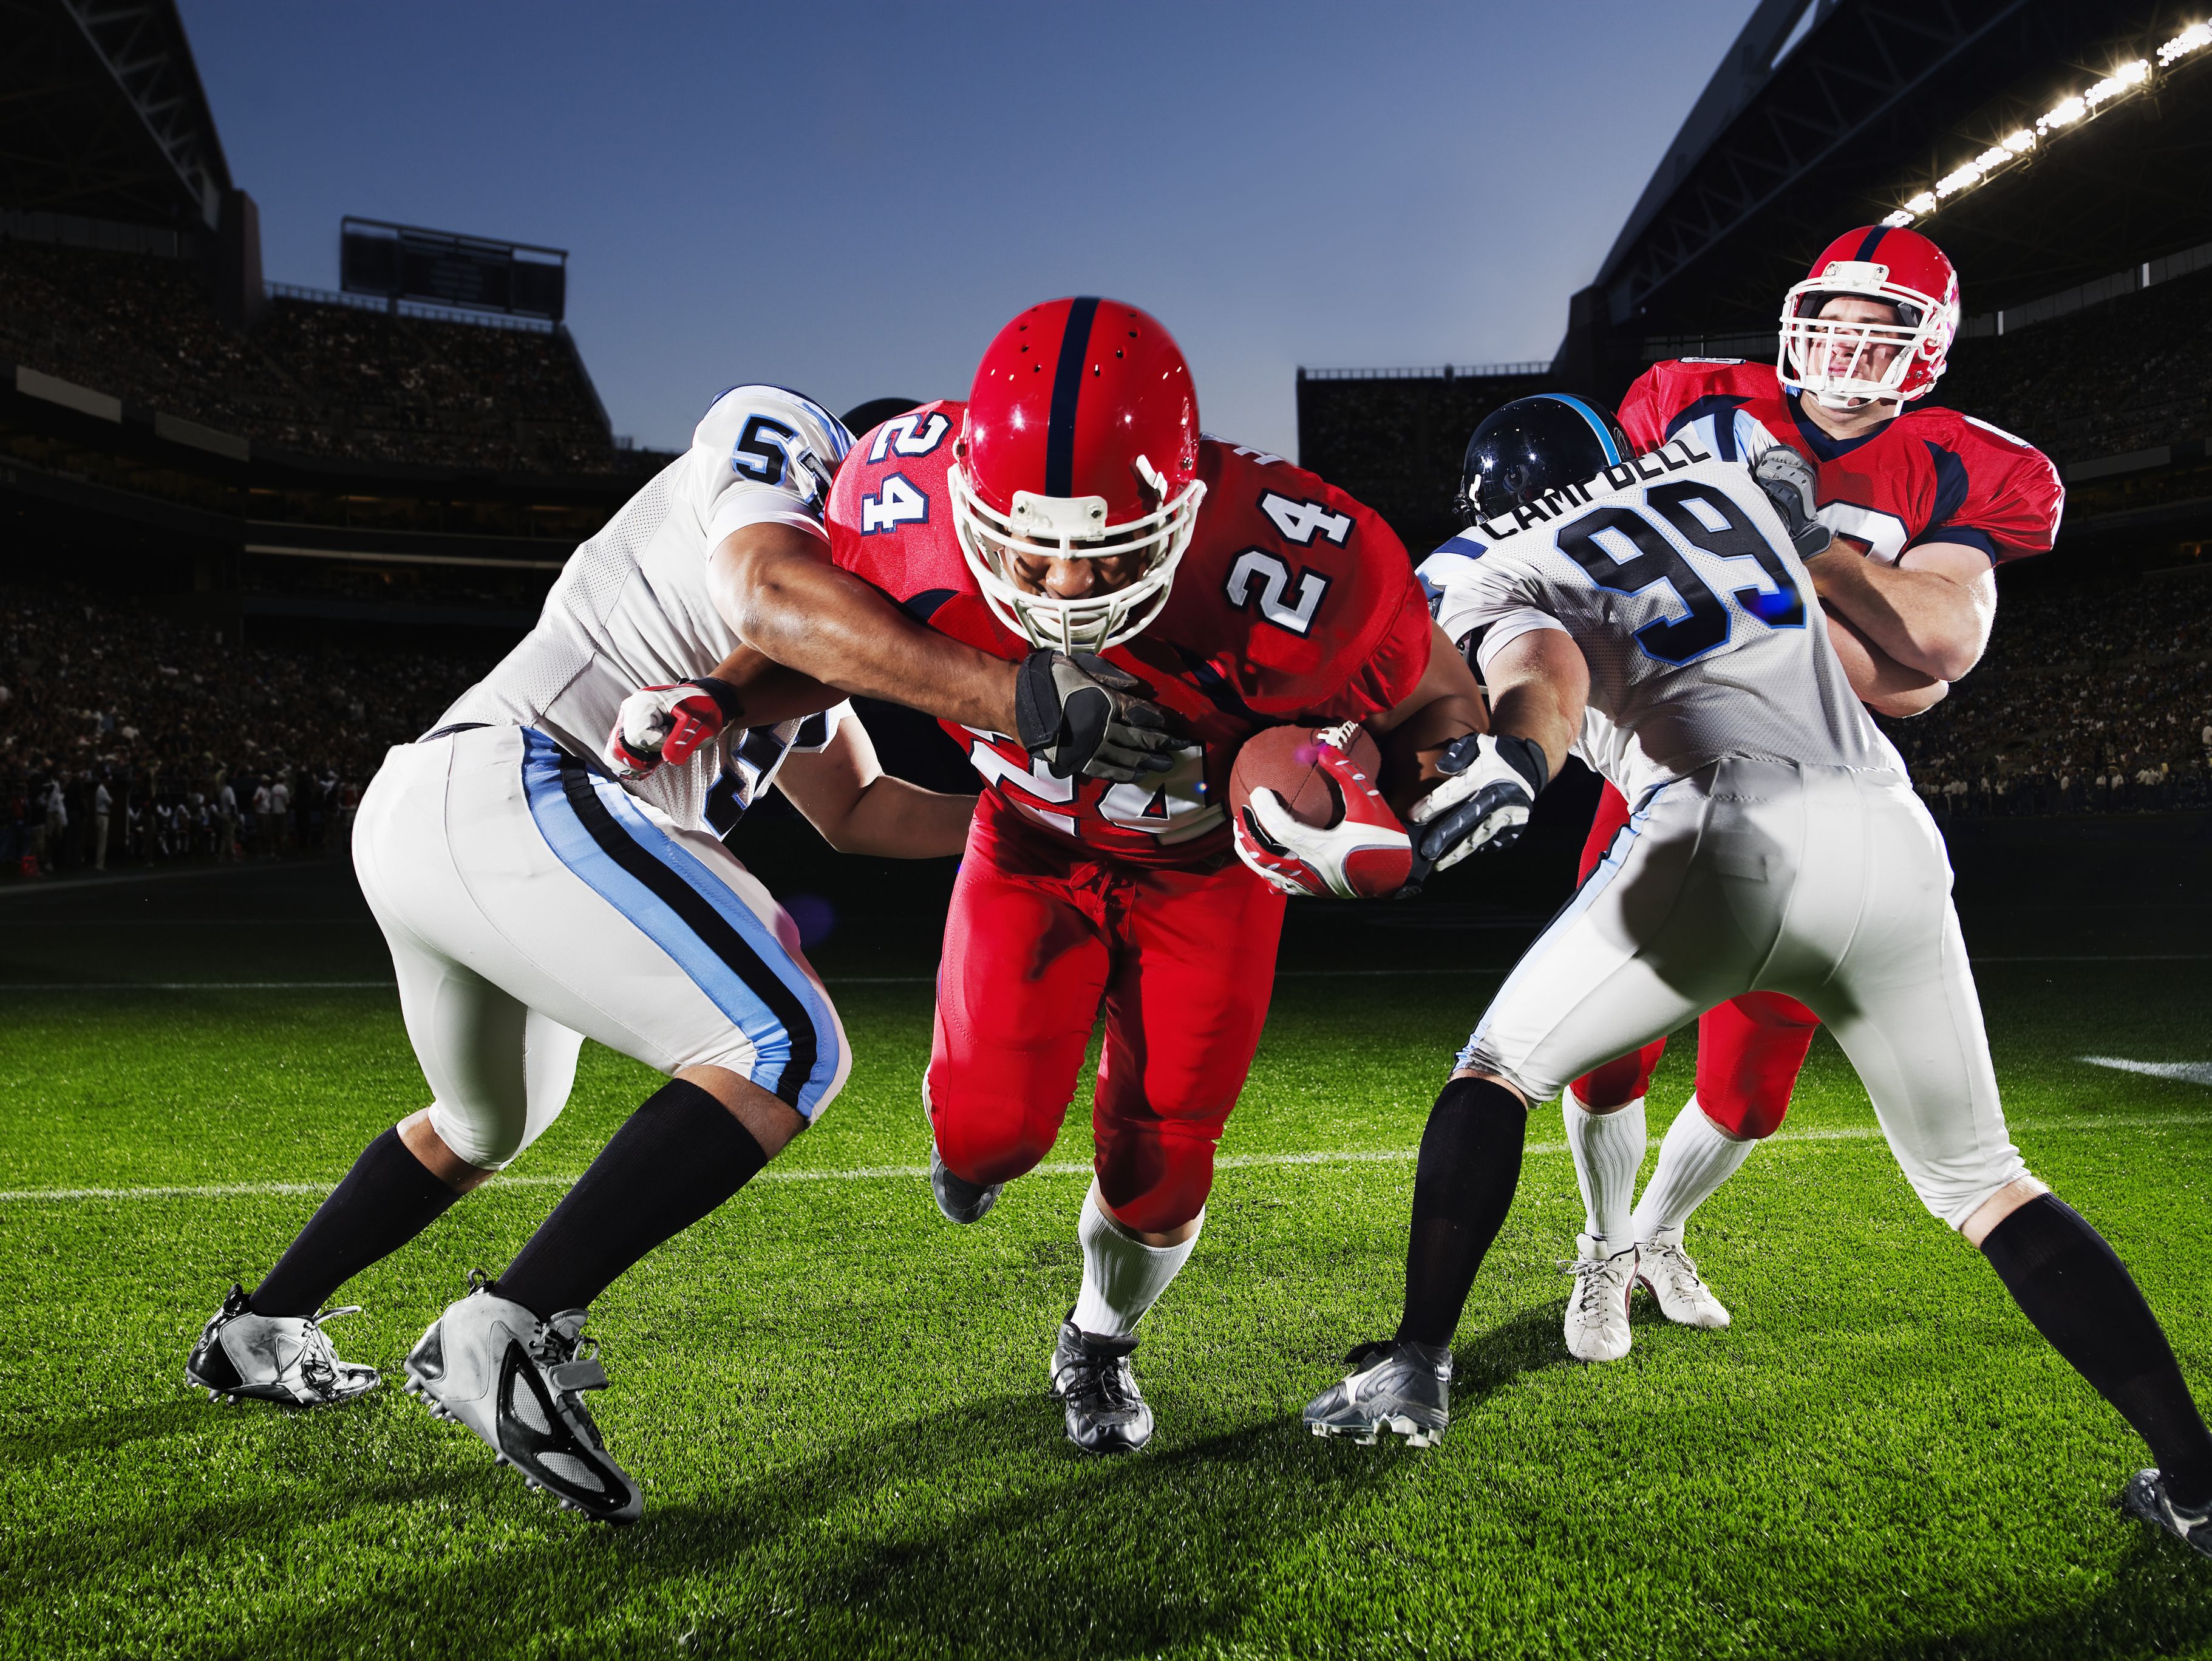 Football & Super Bowl Sweepstakes: Win Free Tickets